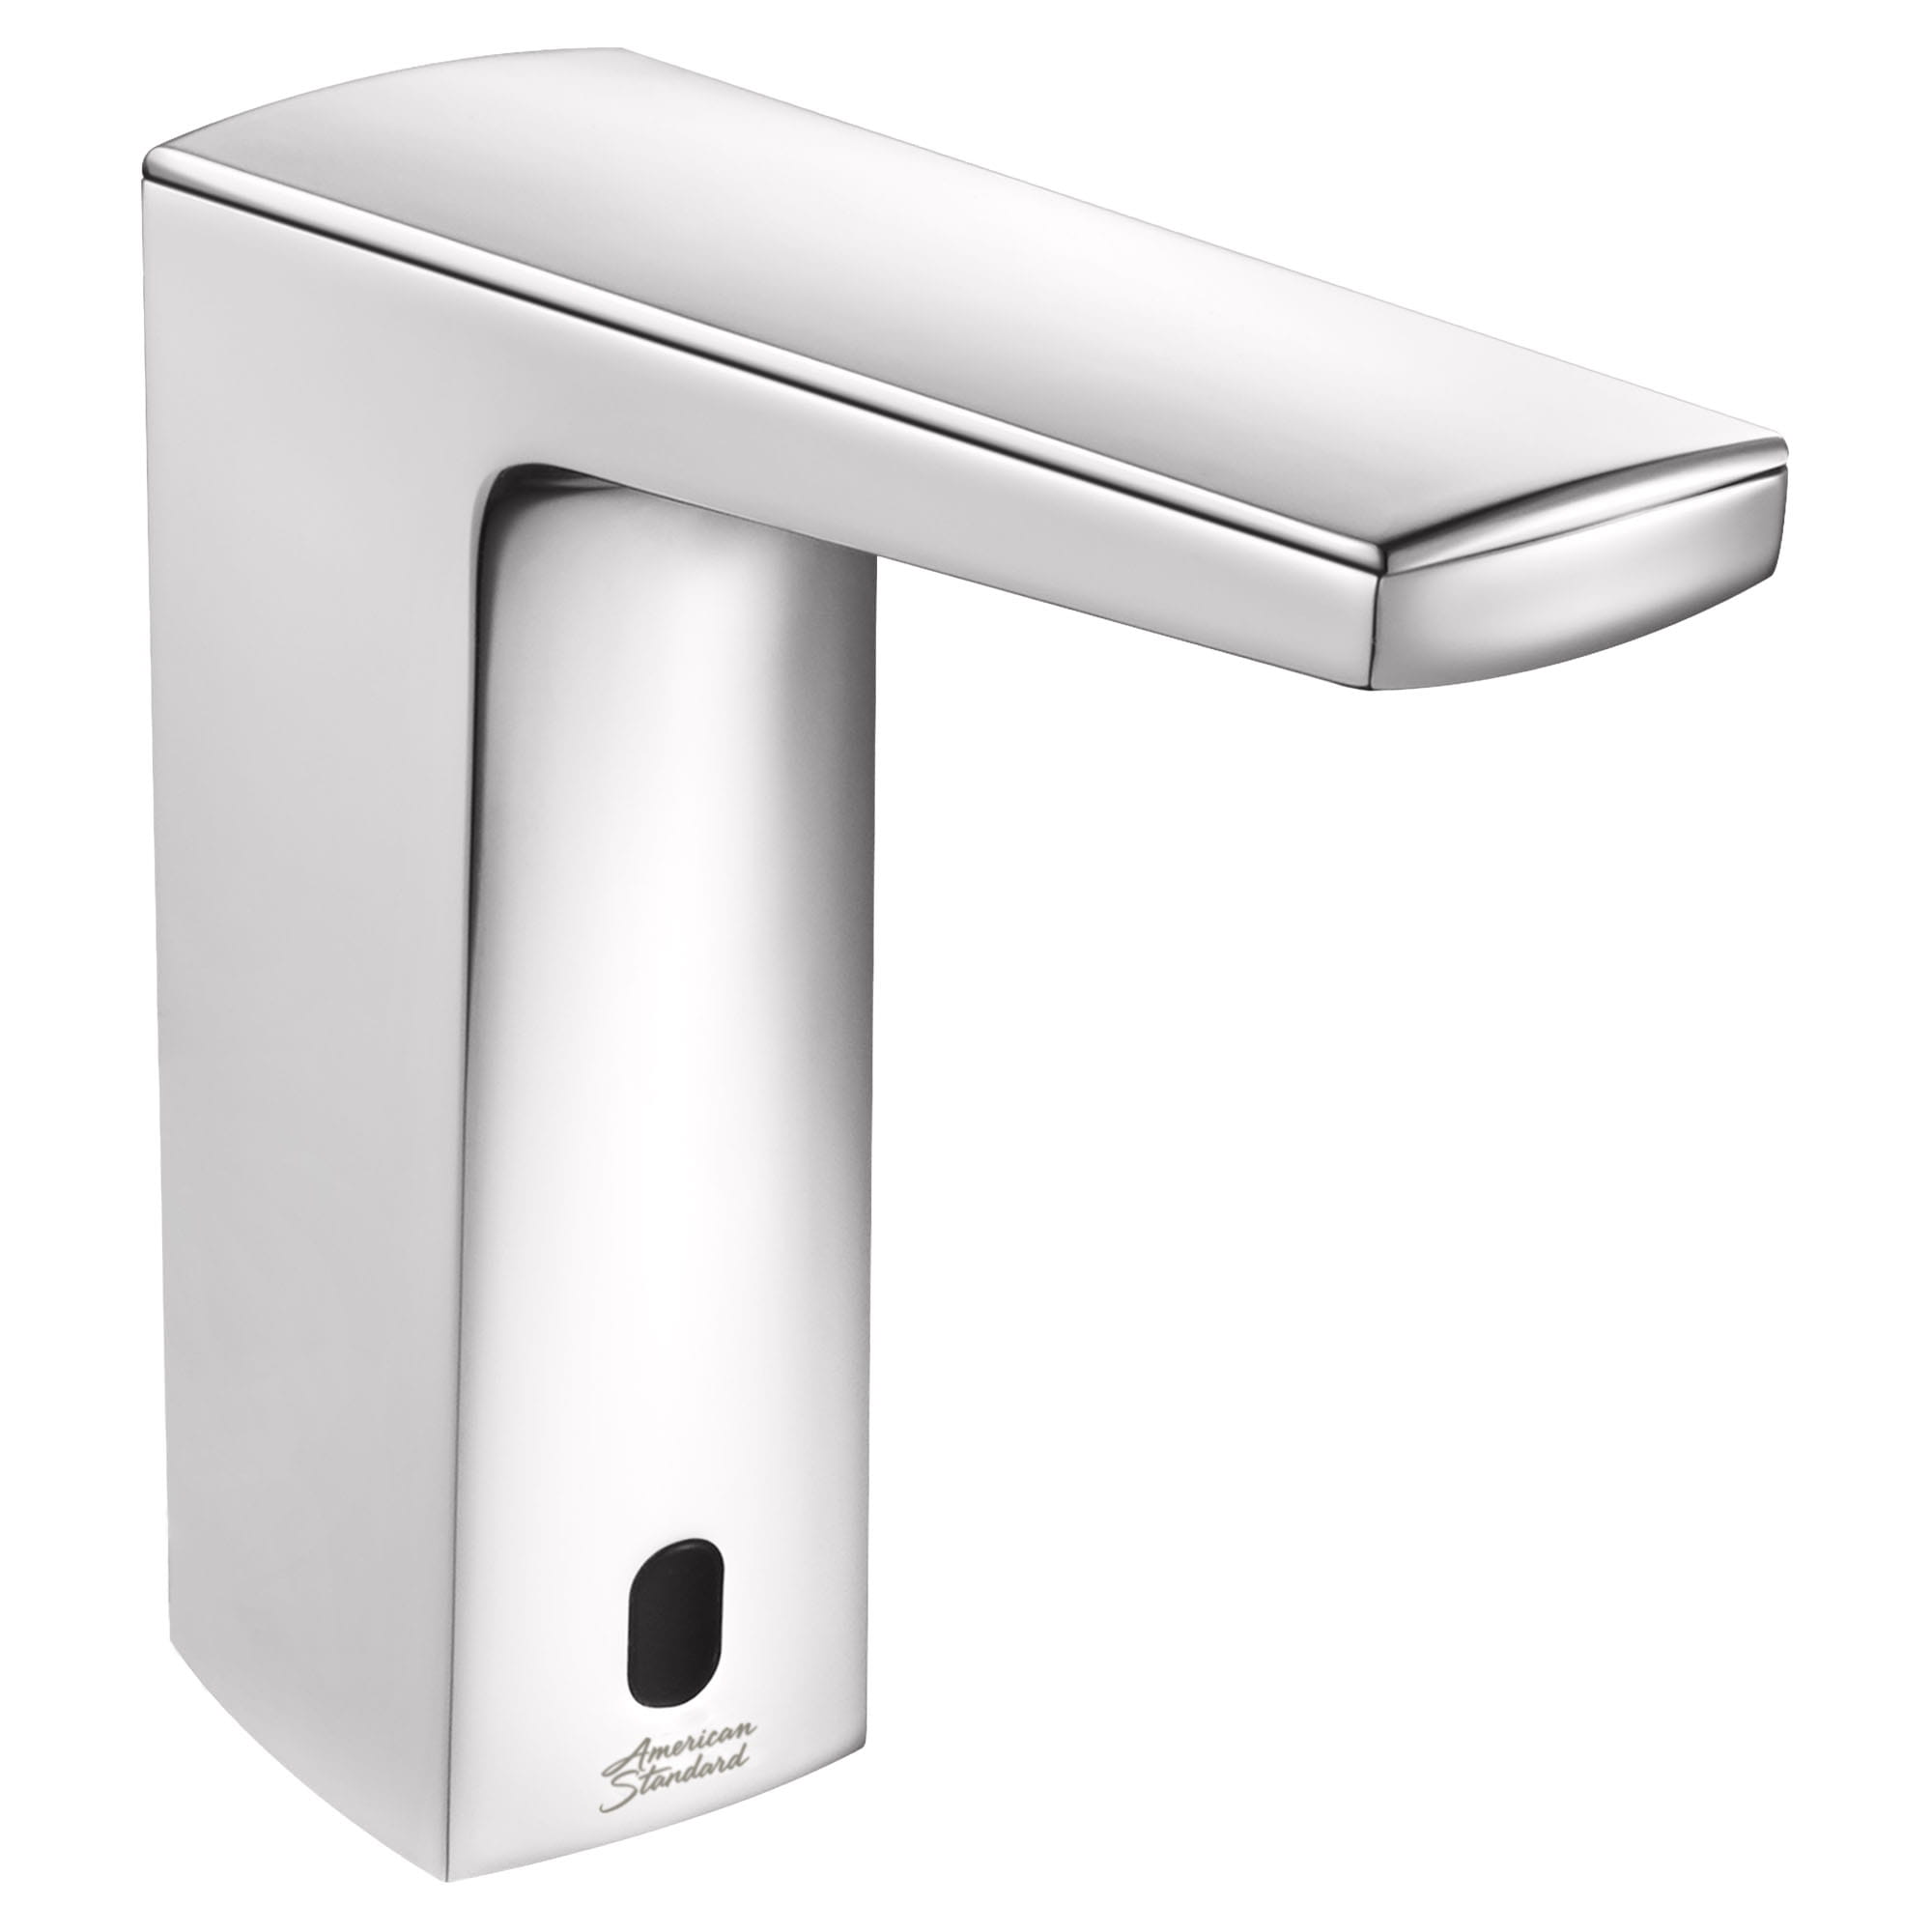 Paradigm Selectronic Touchless Faucet Battery Powered With SmarTherm Safety Shut Off  Plus  ADM 035 gpm 13 Lpm CHROME